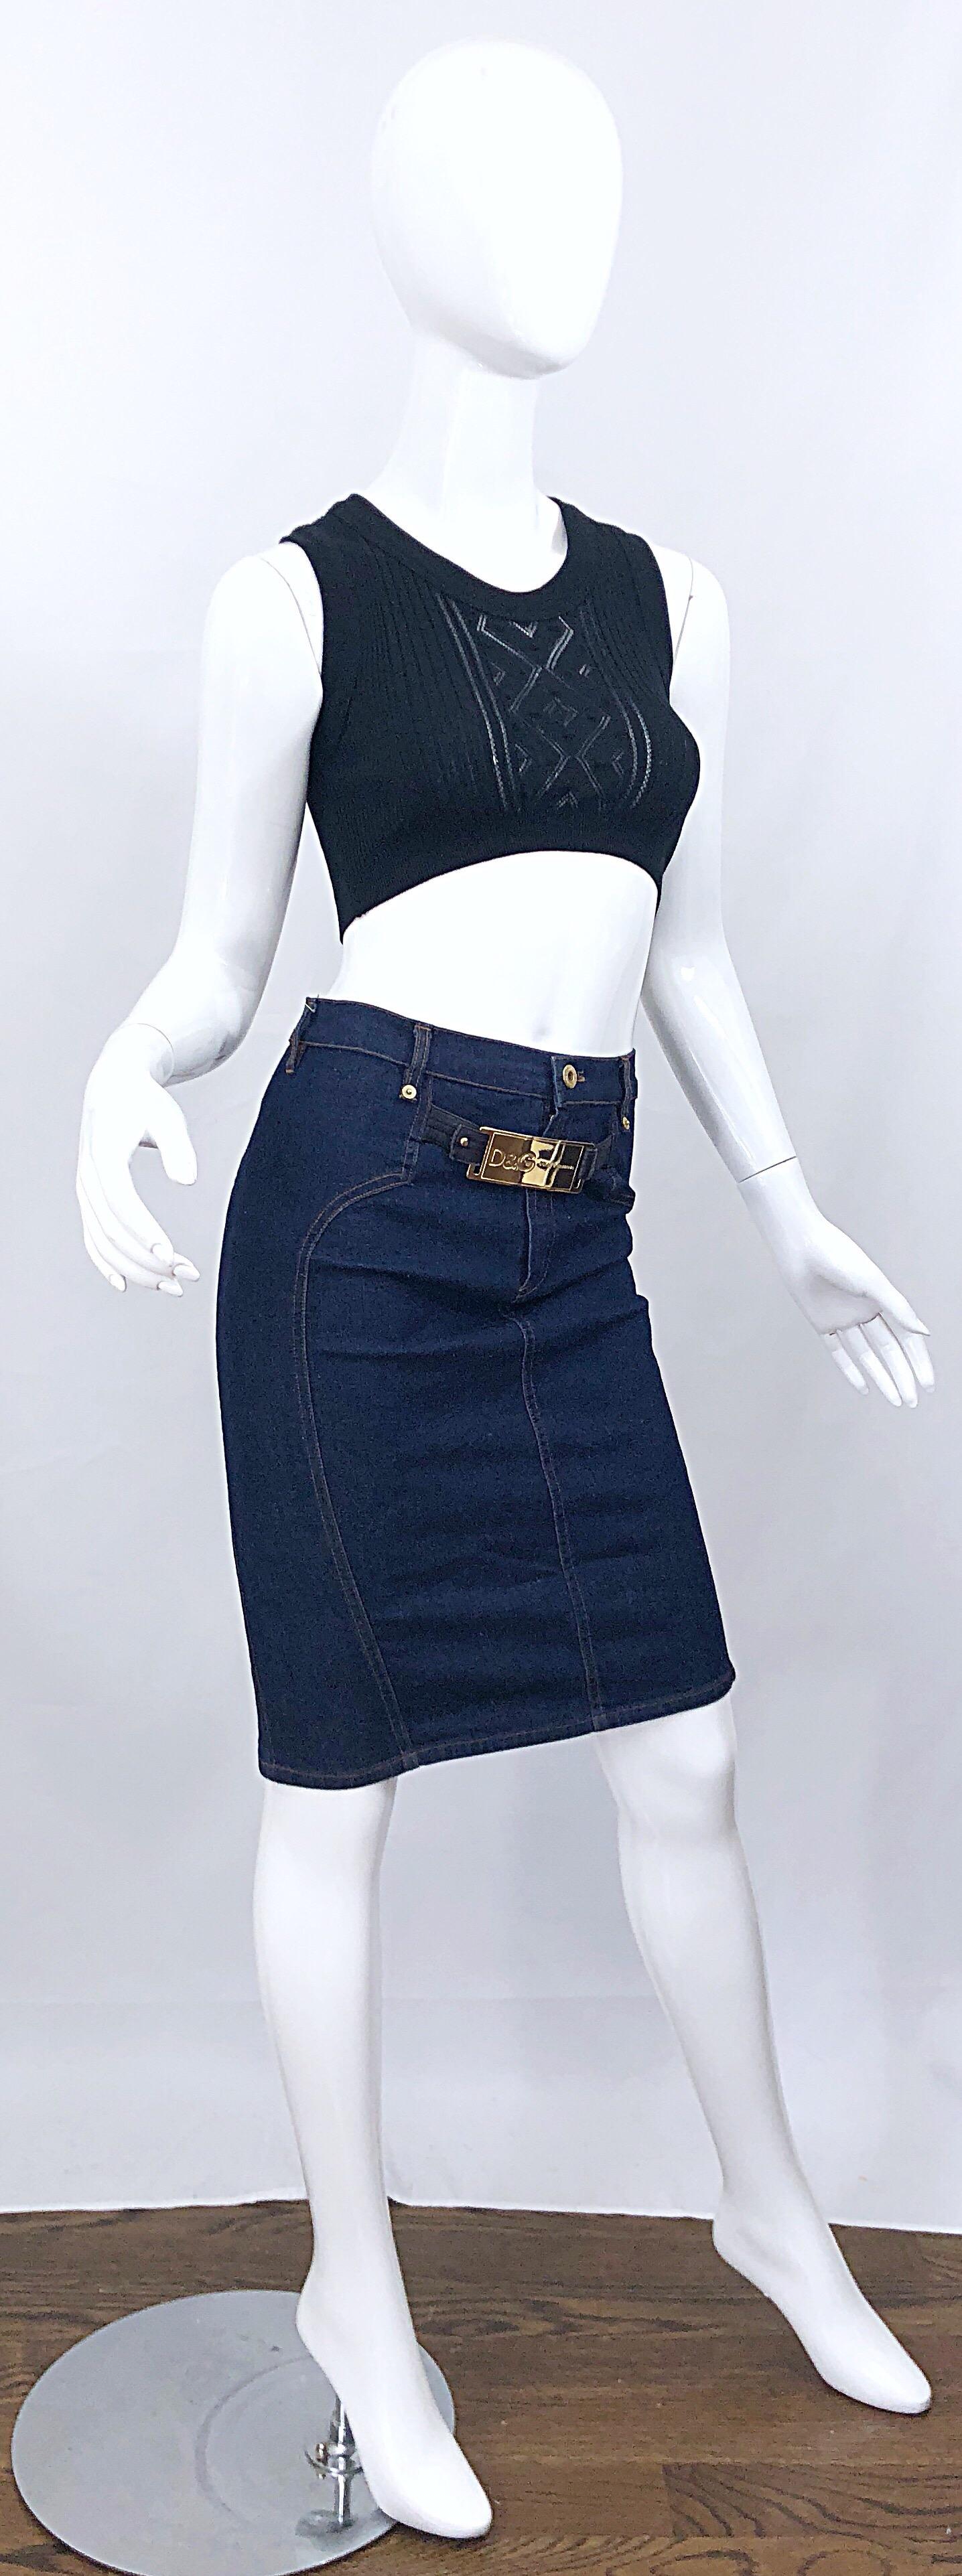 Vintage Dolce & Gabbana Blue Jean 1990s High Waisted 90s Bodcon Pencil Skirt In Excellent Condition For Sale In San Diego, CA